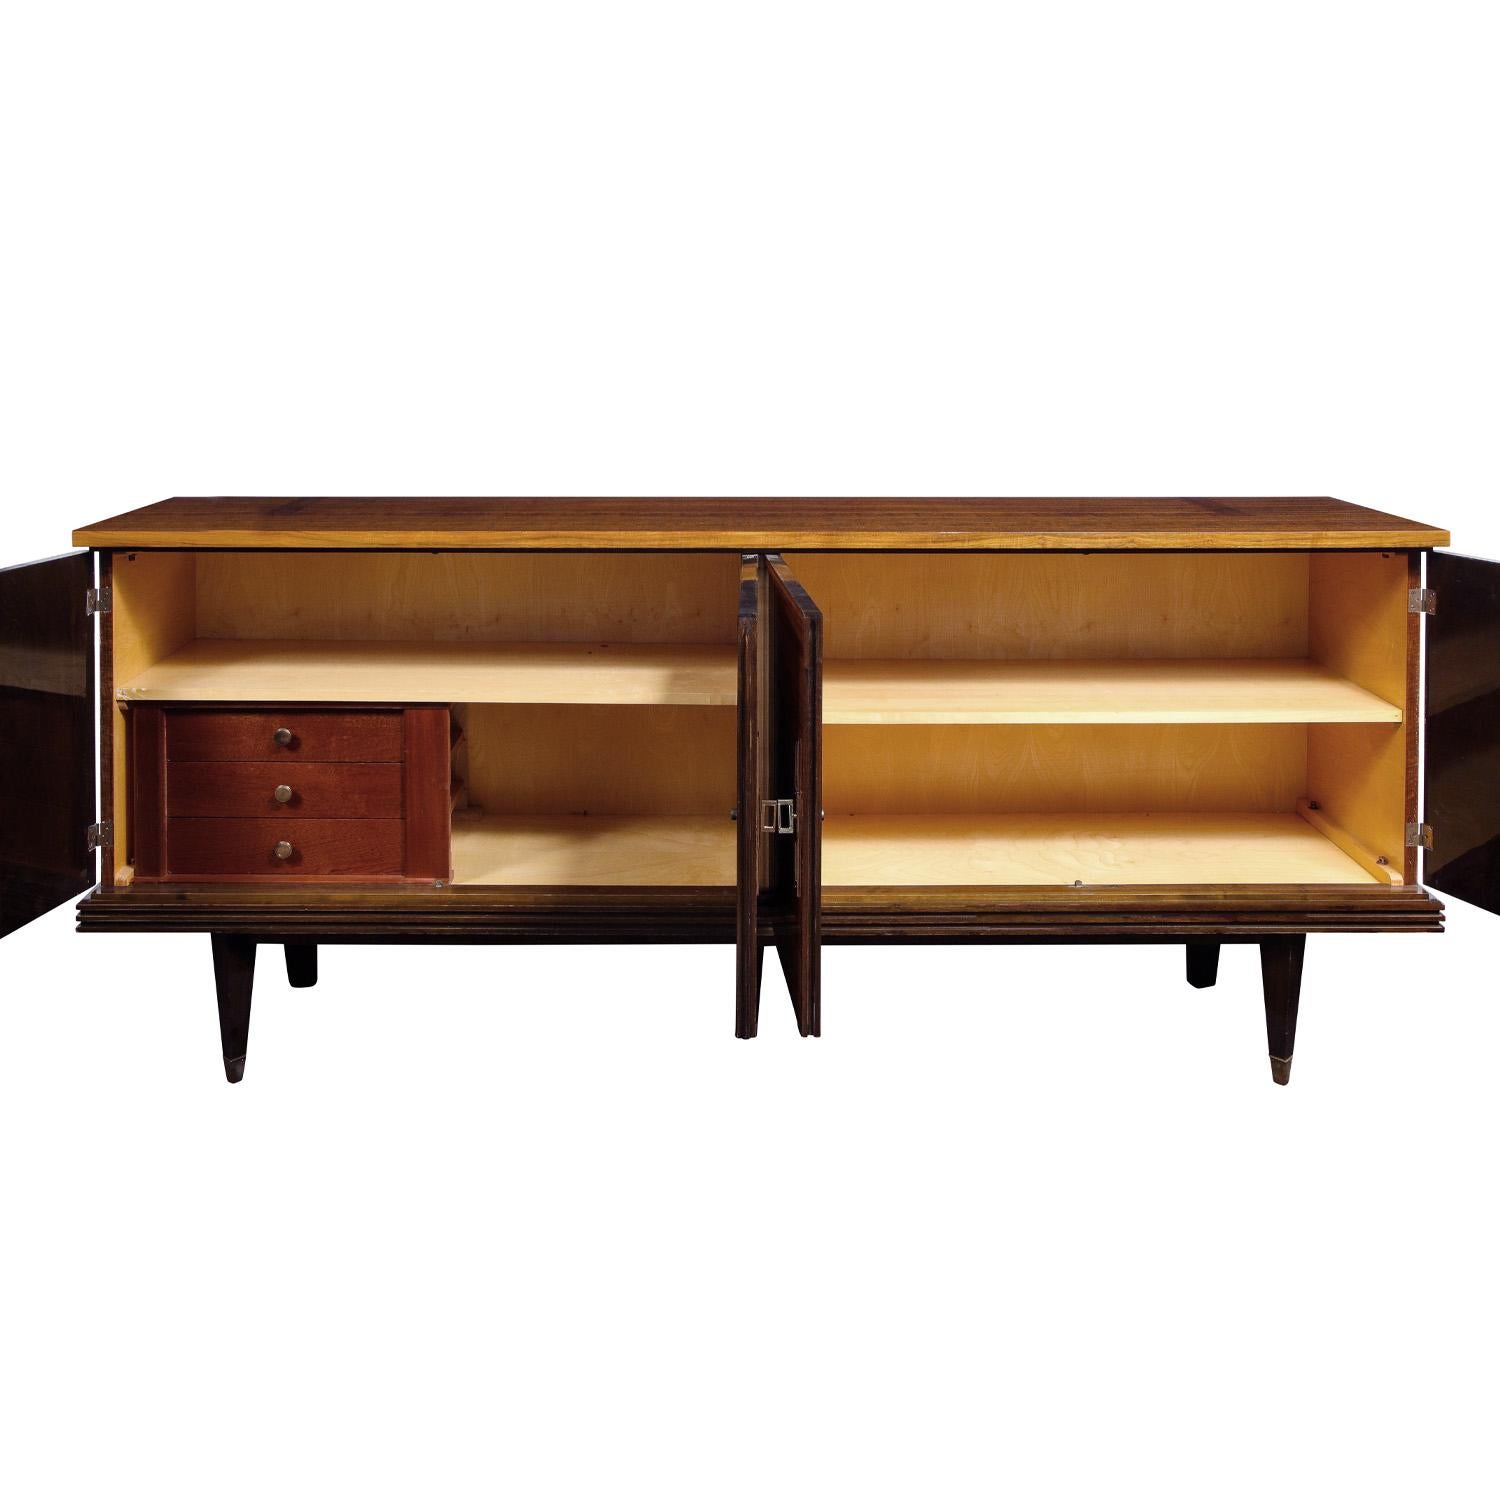 Mid-Century Modern Remarkable French 4 Door Credenza with Marquetry and Inlays 1950s 'Signed'